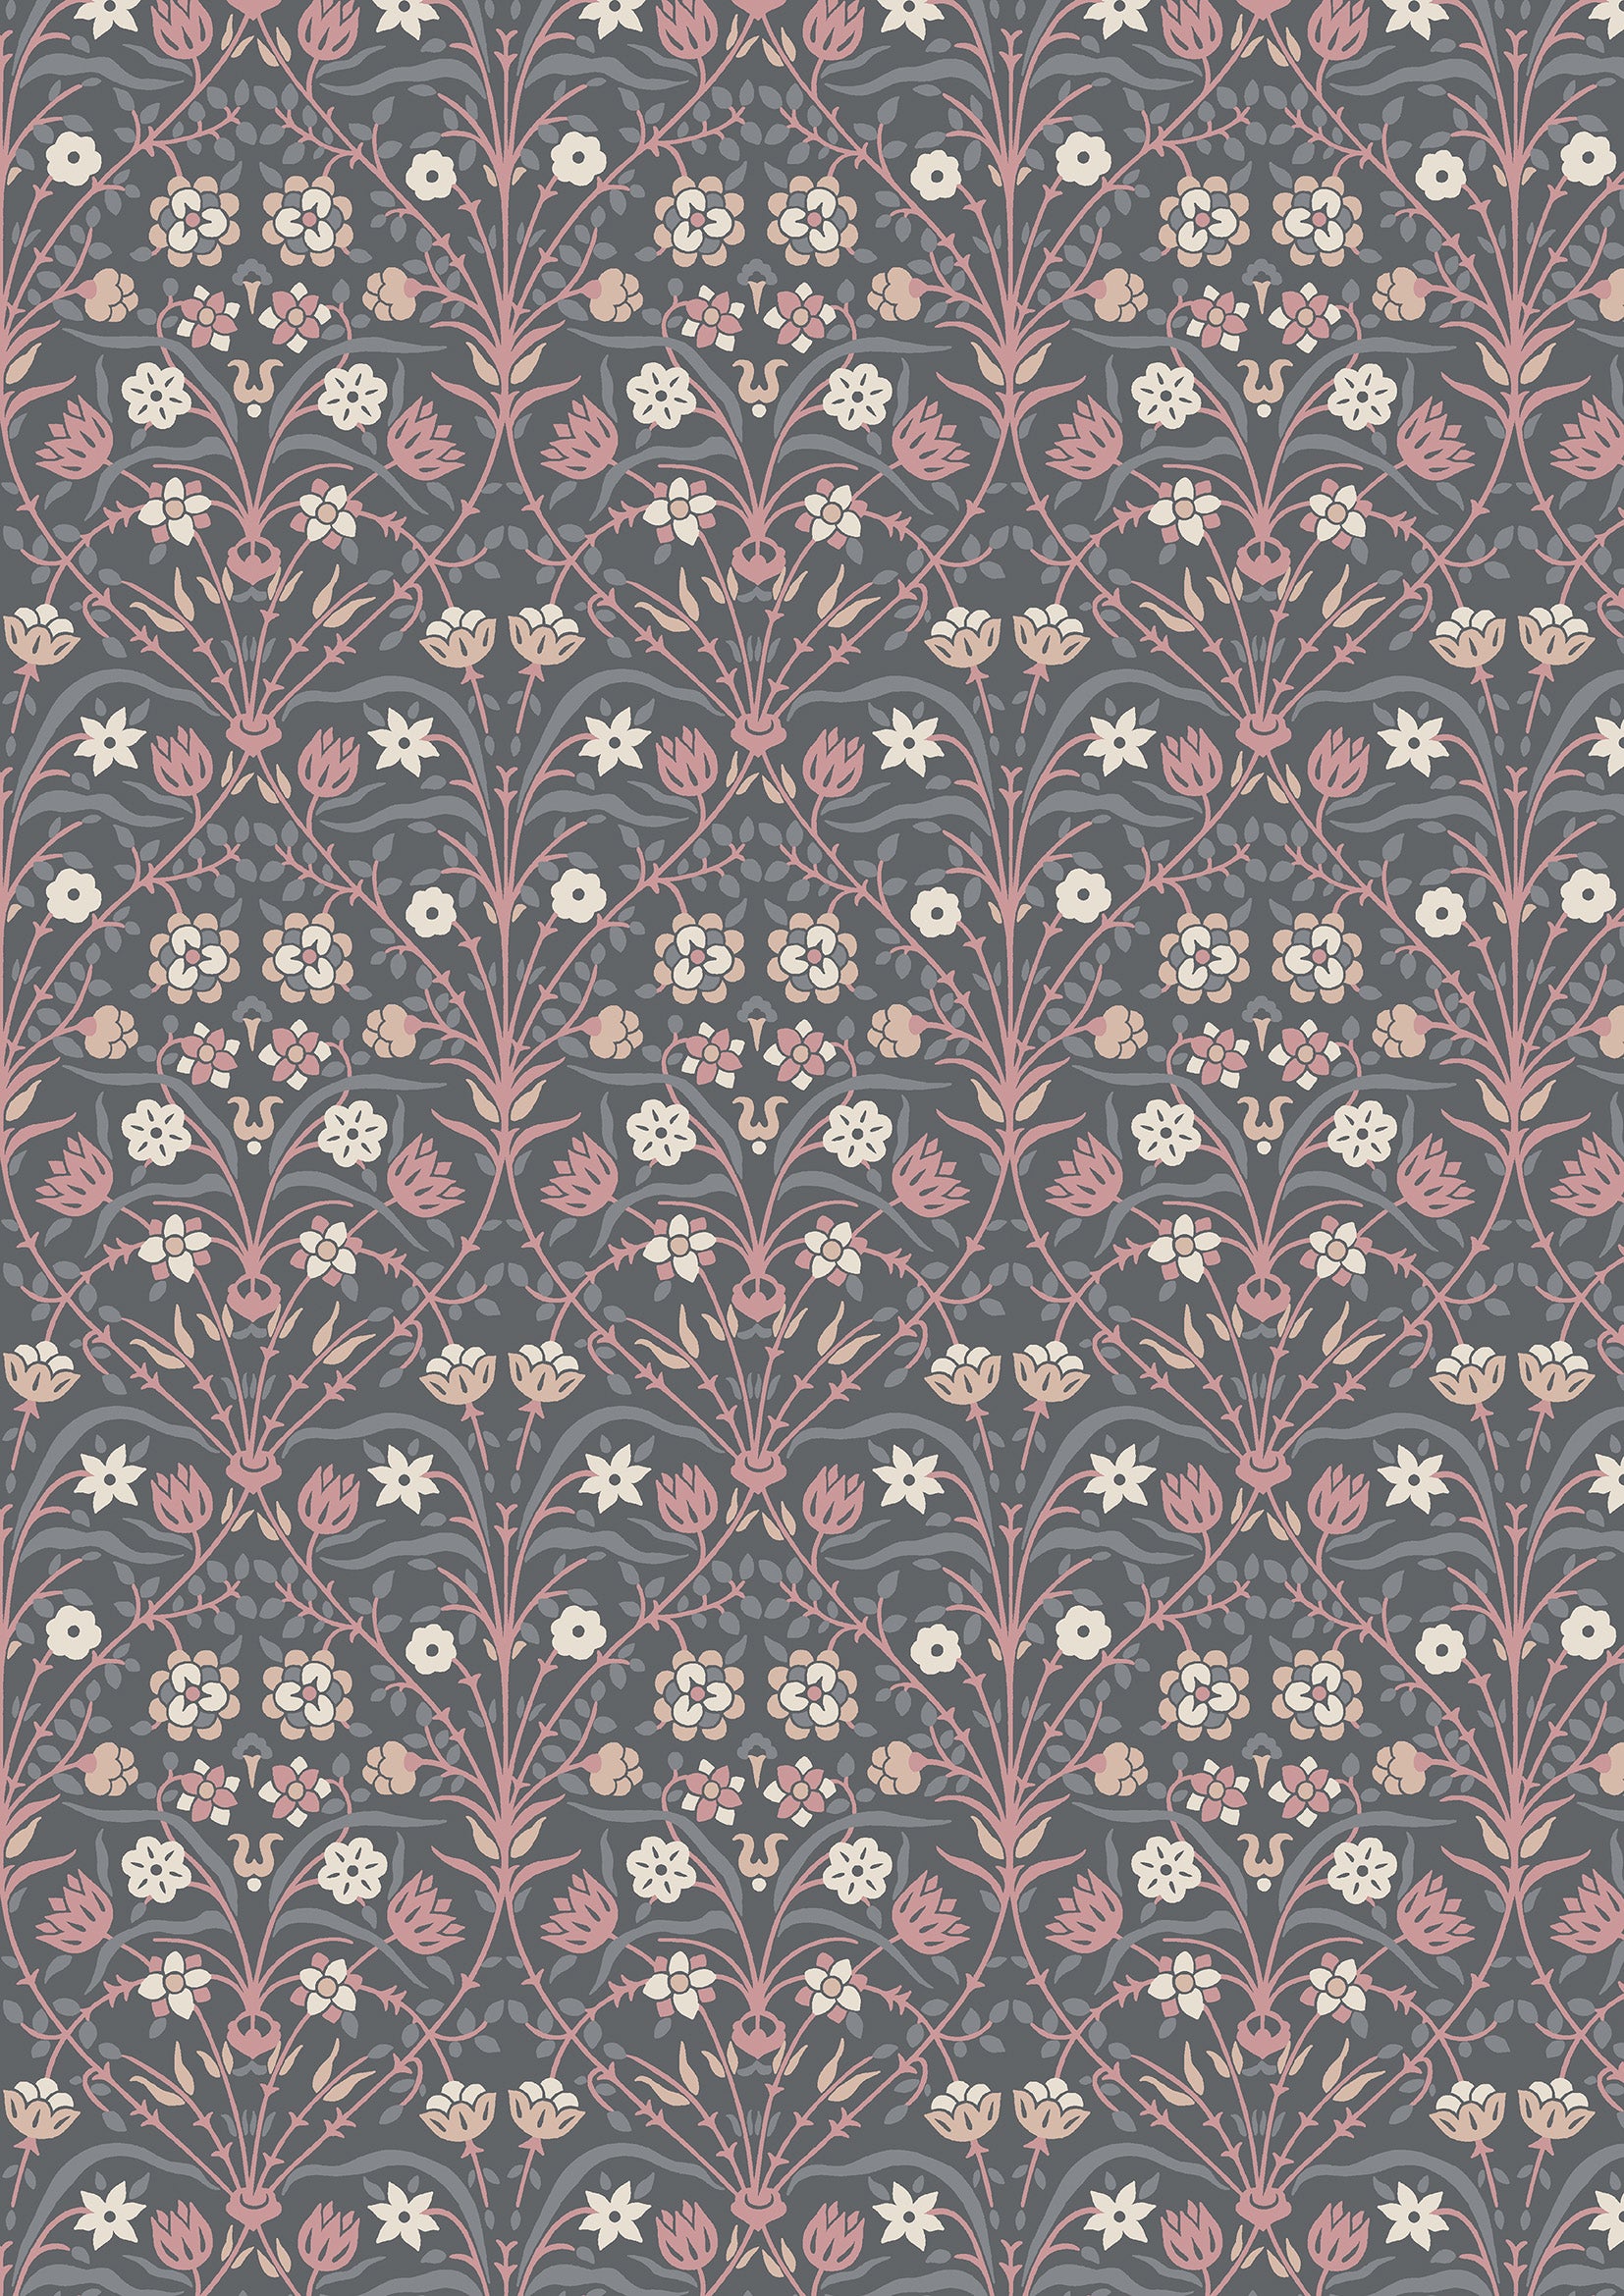 Bankart Fresco from the winterbourne collection by Liberty of London fabrics